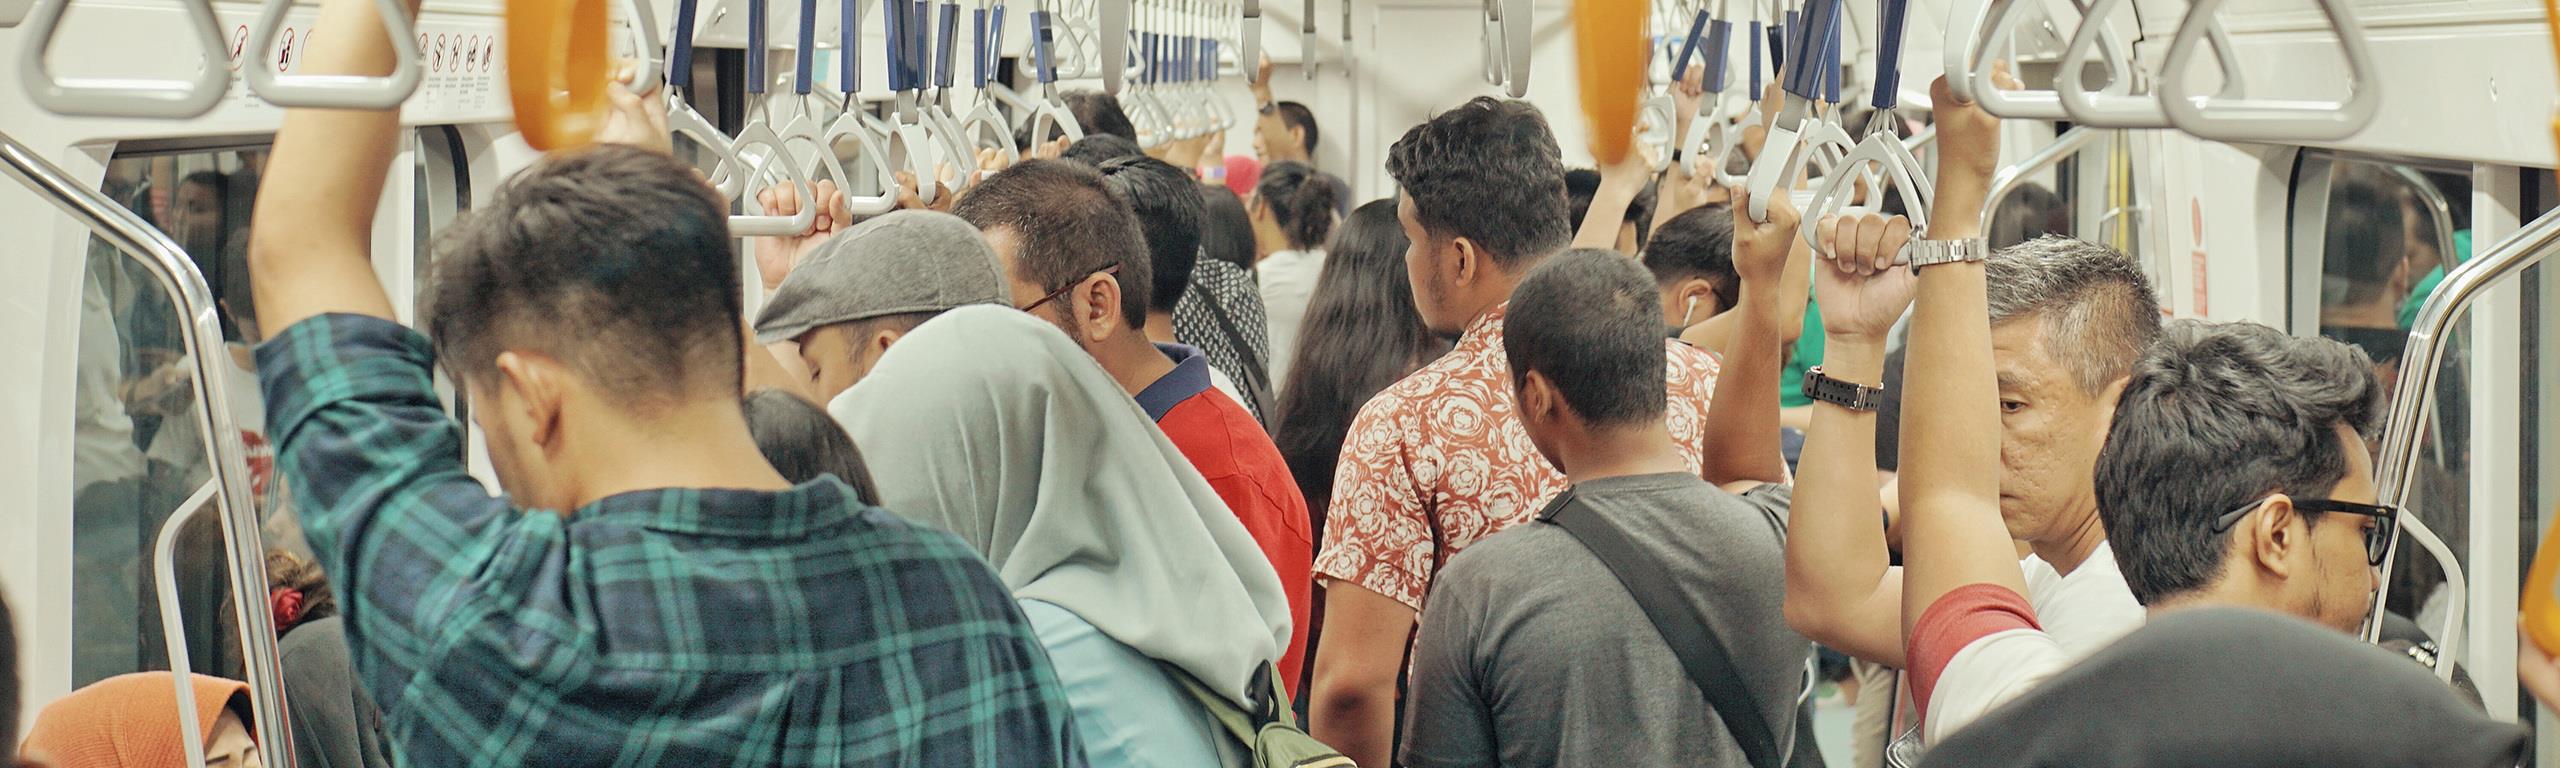 Passengers travelling on a train as part of the MRT line.